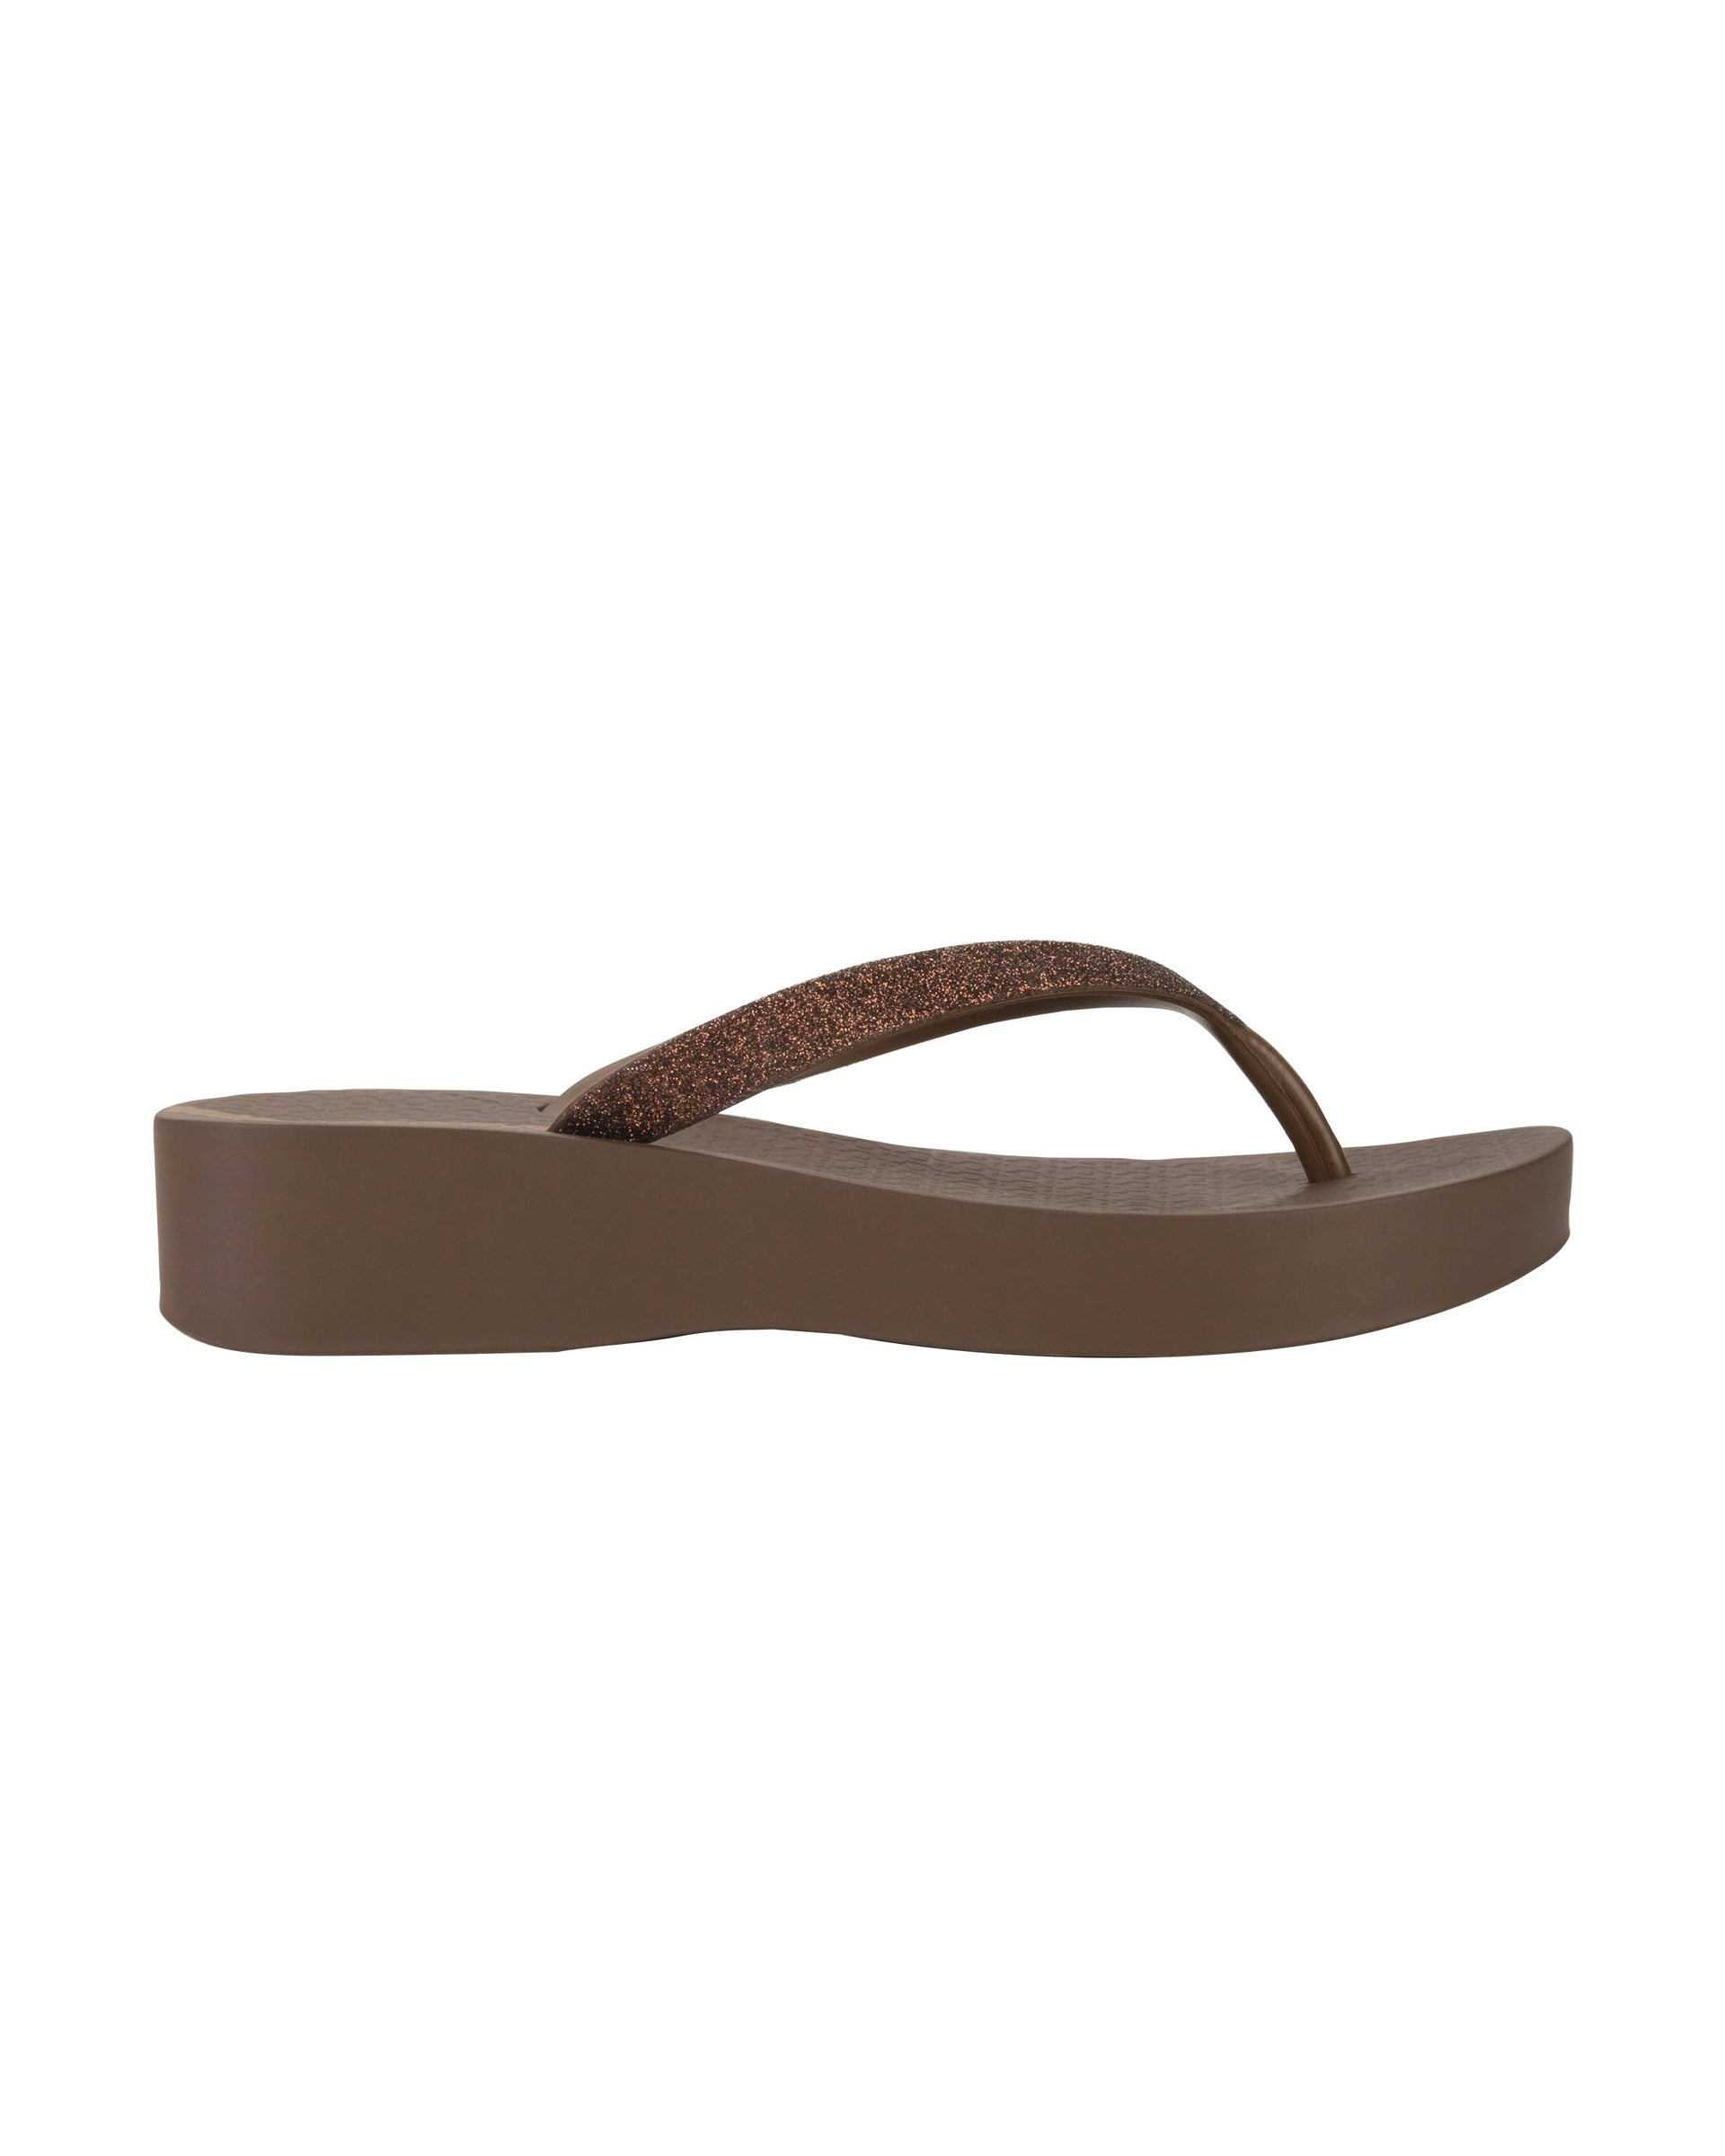 Outer side view of a brown Ipanema Mesh Chic women's wedge flip flop with glitter brown straps.